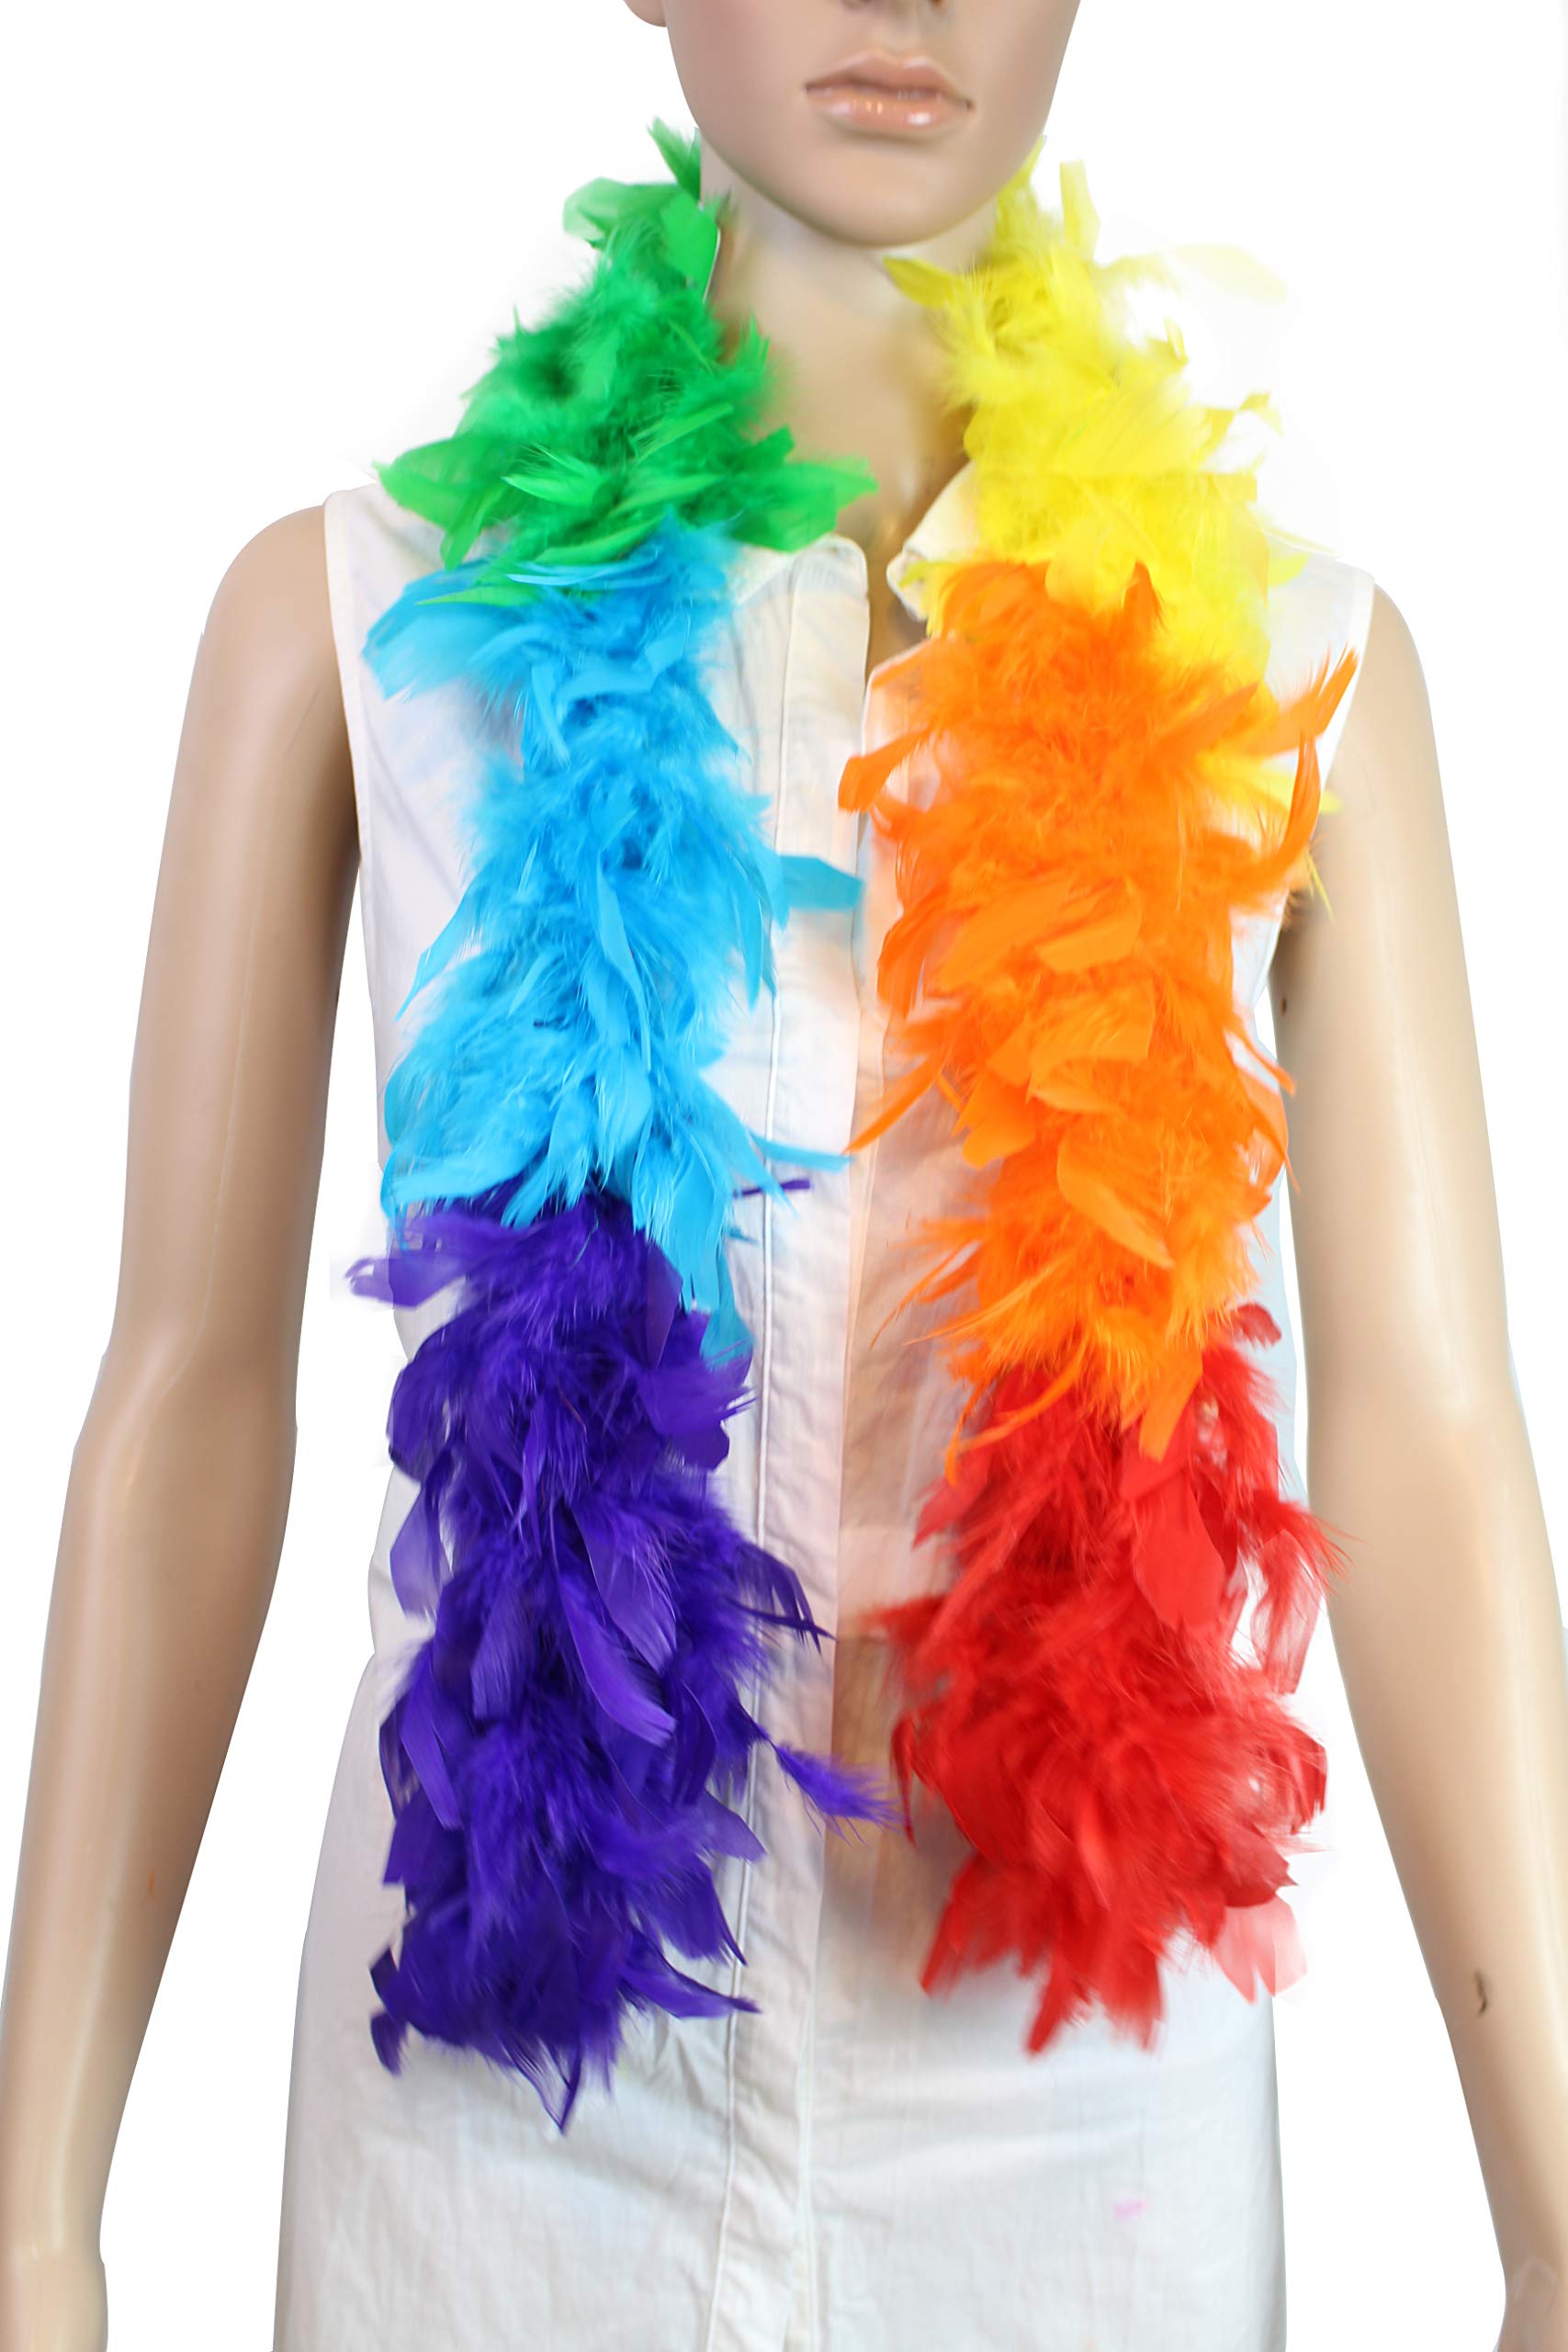 flydreamfeathers Rainbow Color 25 Gram, 4 Feet Long Chandelle Feather Boa, Great for Kids Party, Wedding, Halloween Costume, Christmas Tree, Decoration